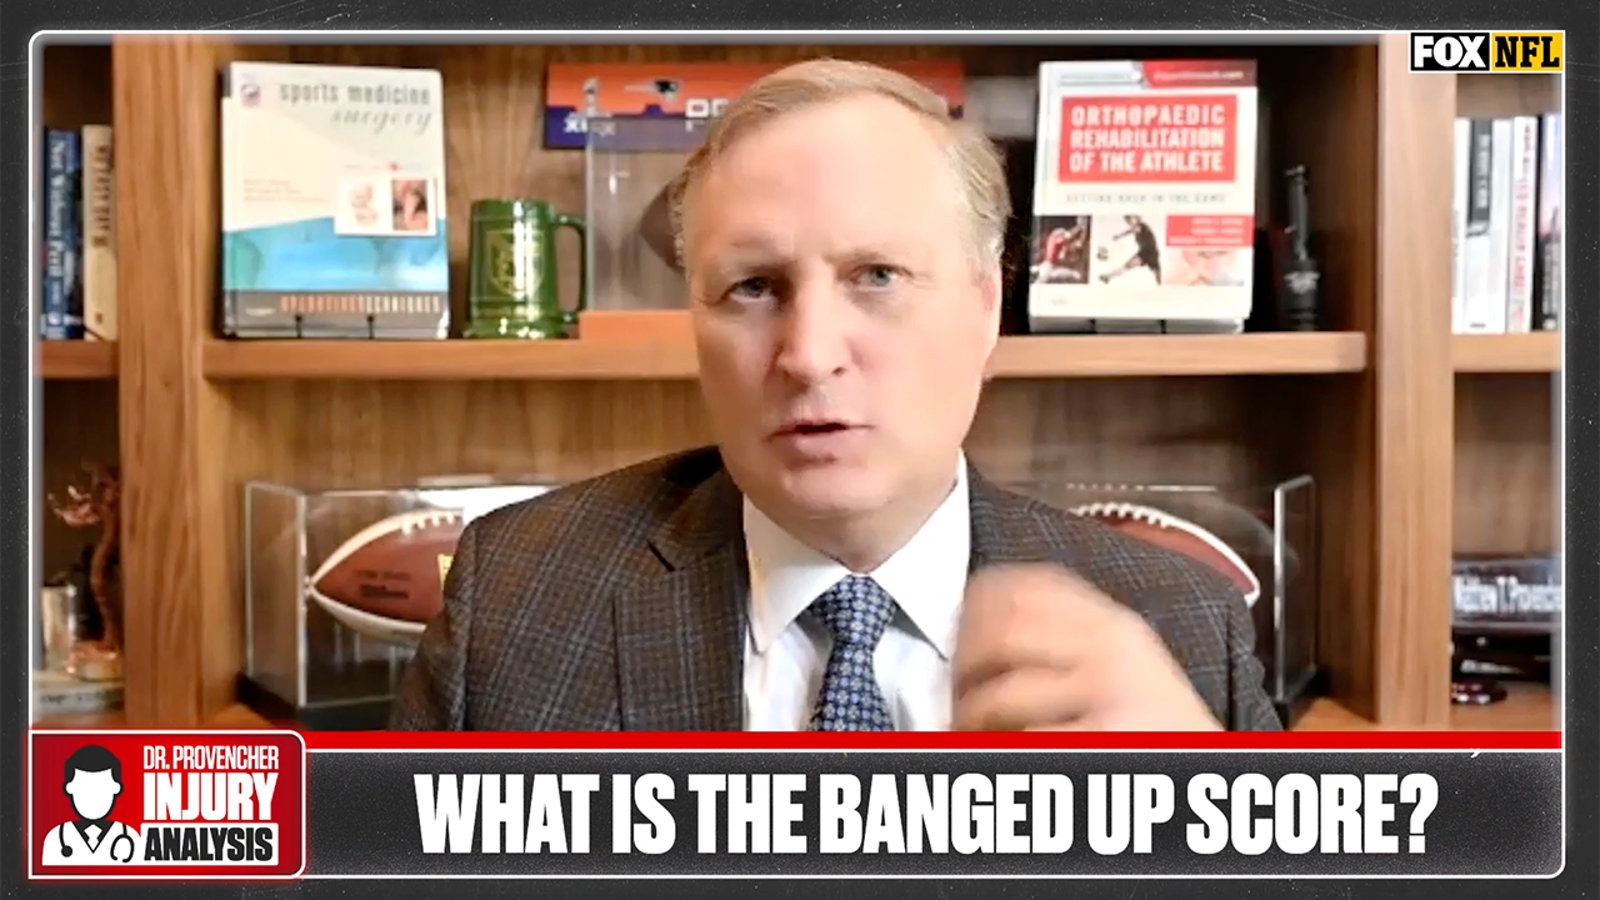 What is the 'Banged Up Score'?